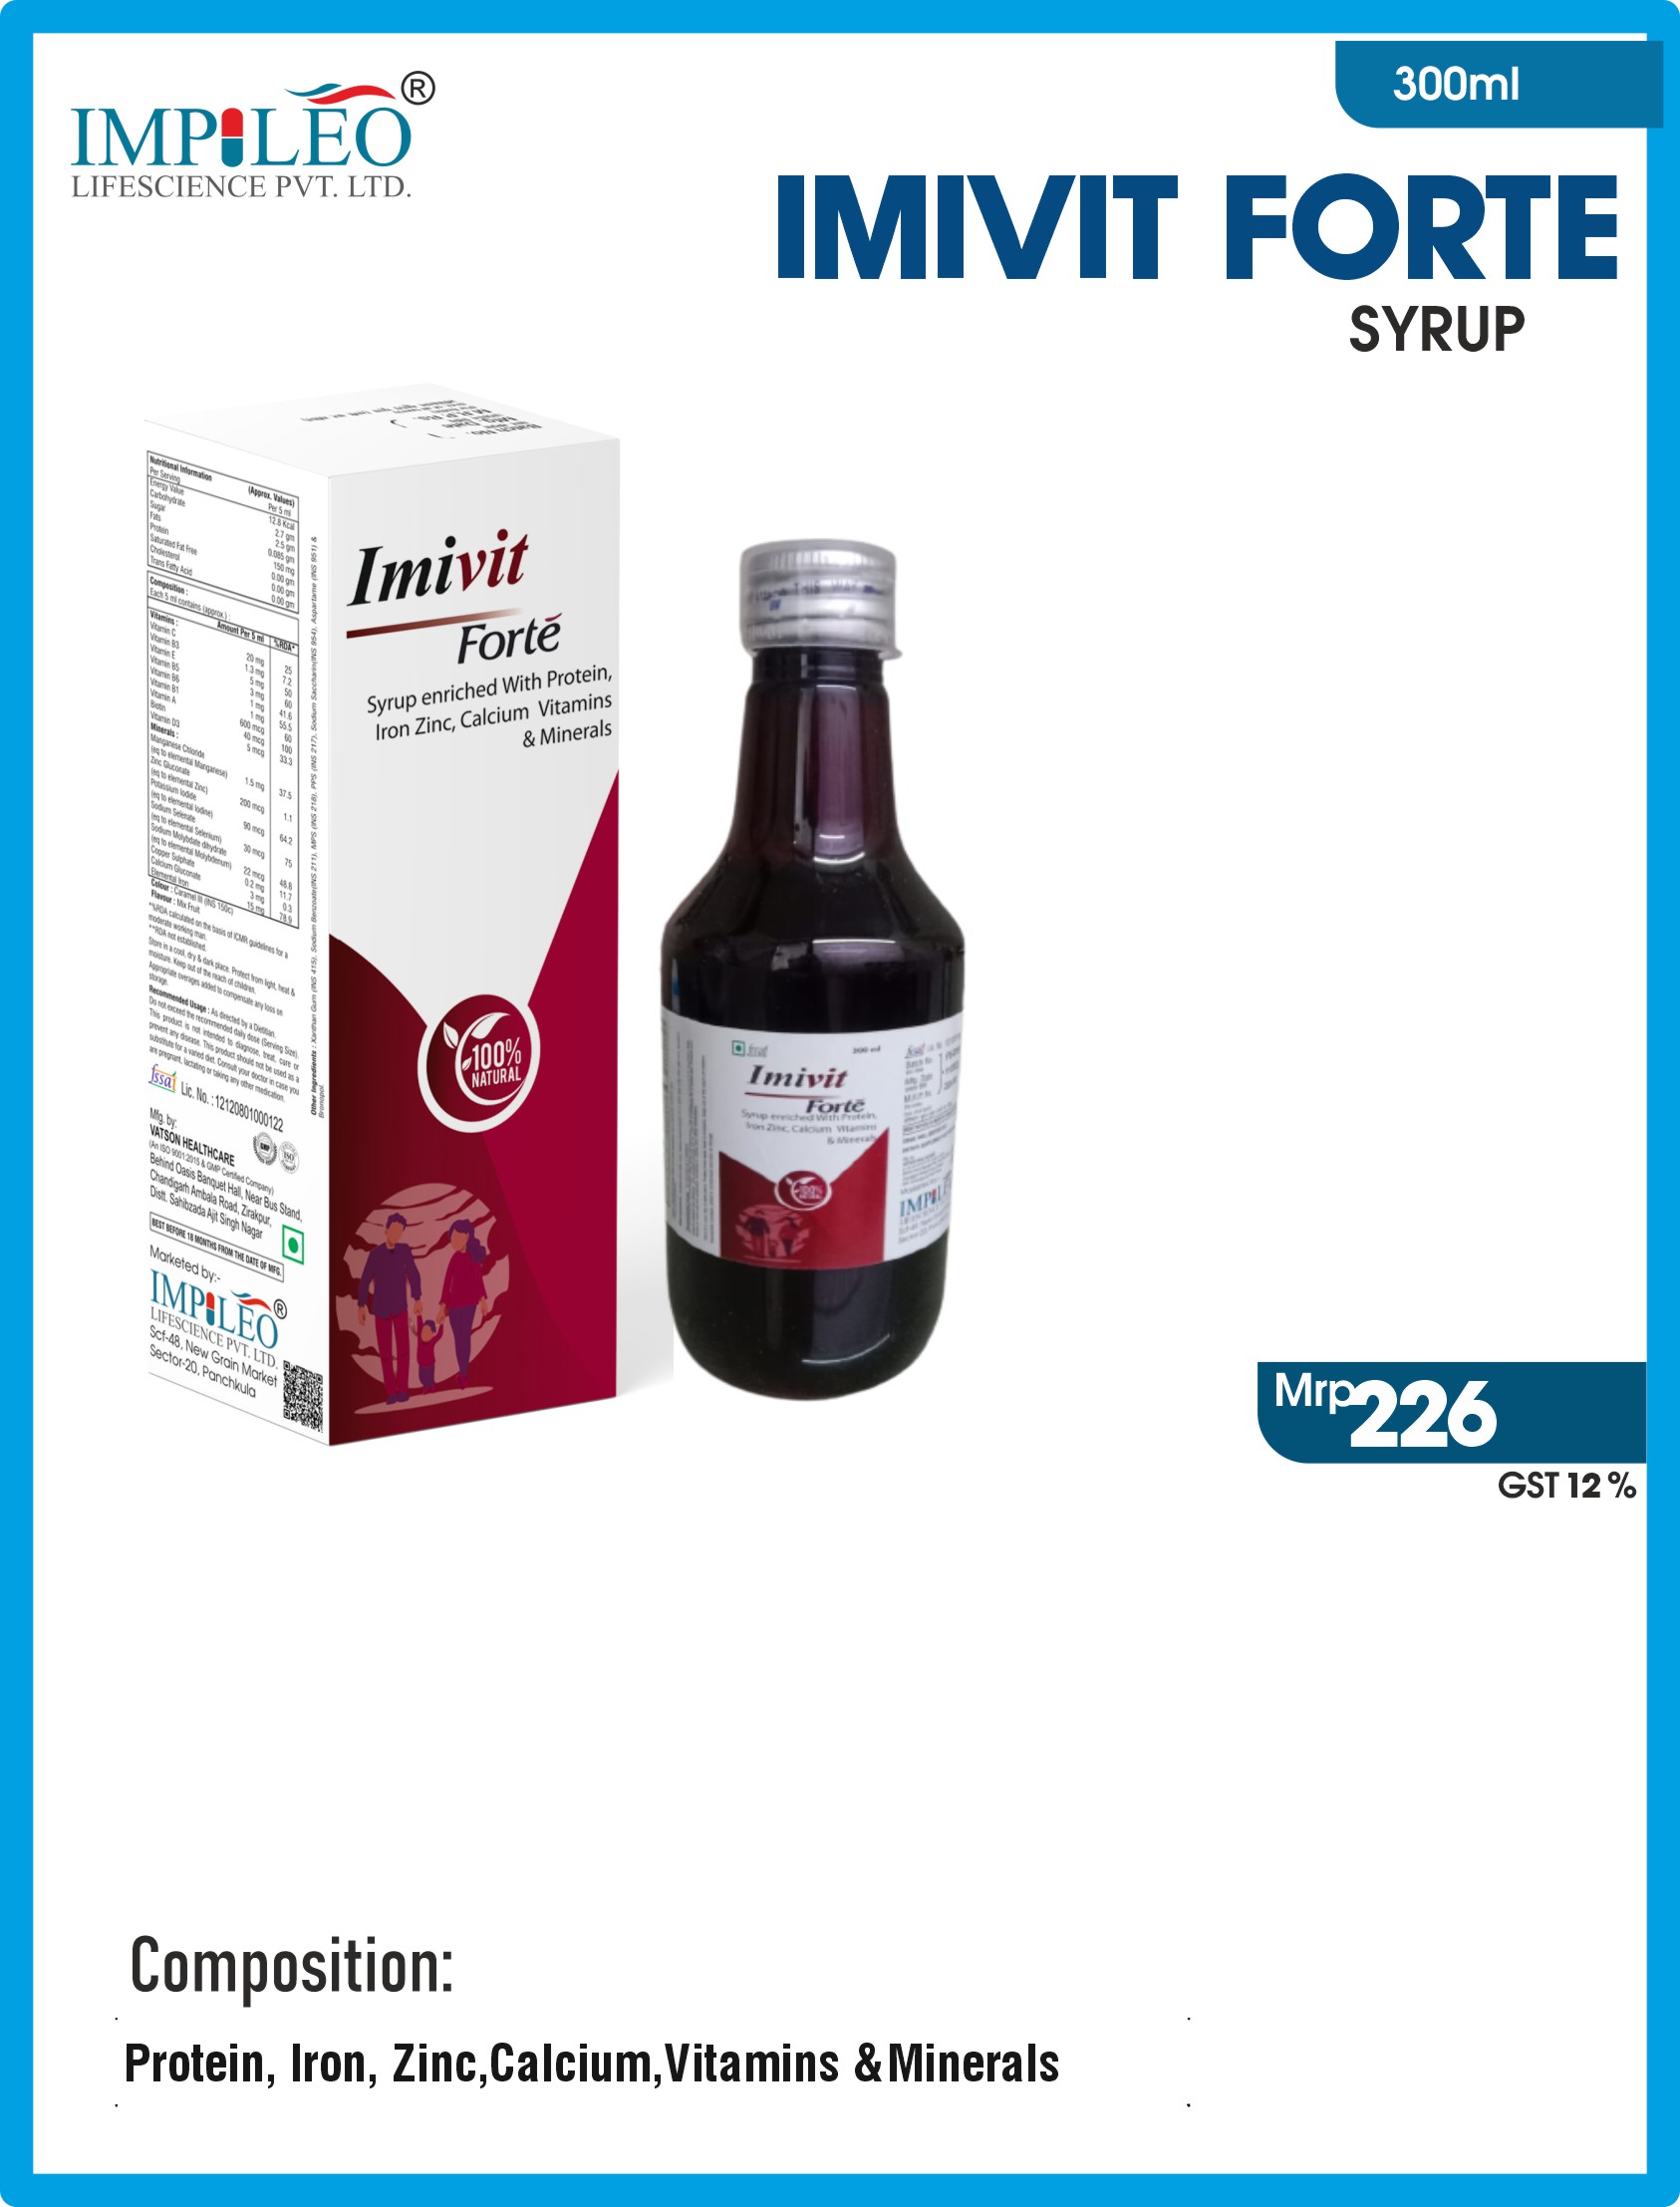 Discover Excellence: IMIVIT FORTE SYRUP, Crafted by Premier Third Party Manufacturing in India